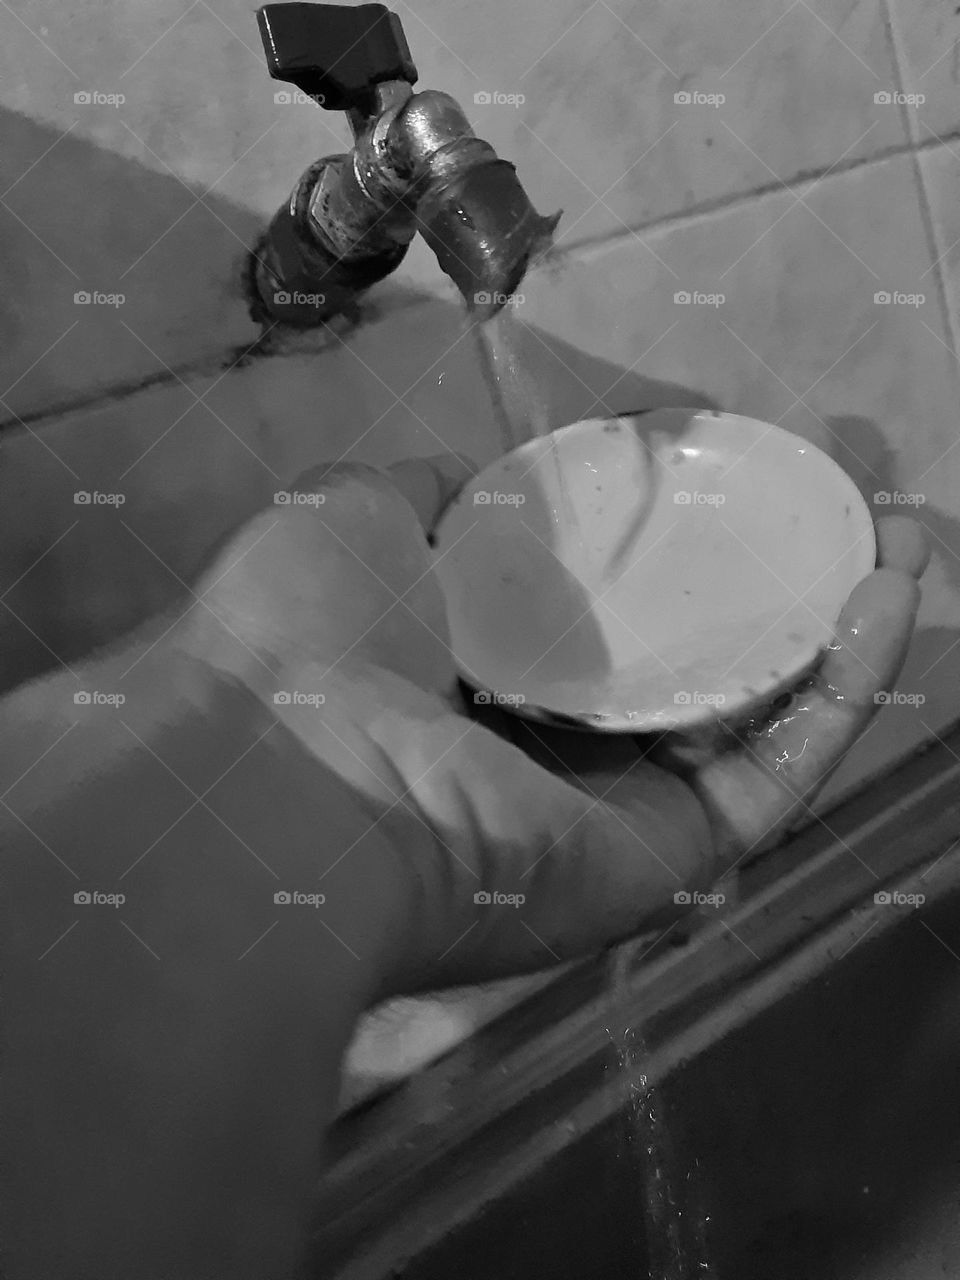 A hand washing a mini plate under the water tap in the form of fine art style